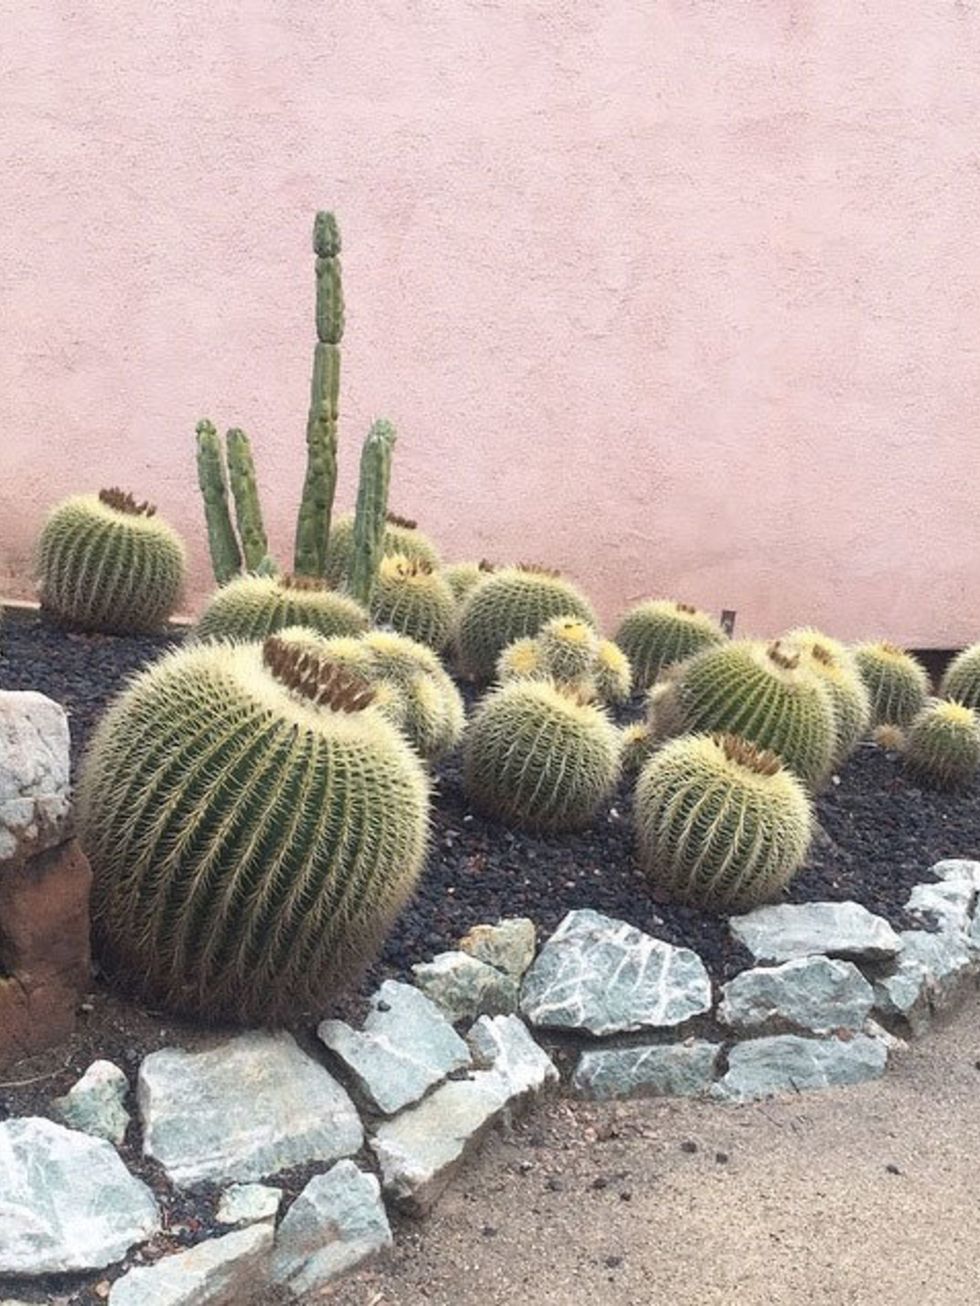 <p><a href="https://instagram.com/p/xyFQDNt3iT/?taken-by=sarah_winward"><strong>@sarah_winward</strong></a></p>

<p>Inside or out, we've always got a place for a cactus. Minimal watering needed.</p>